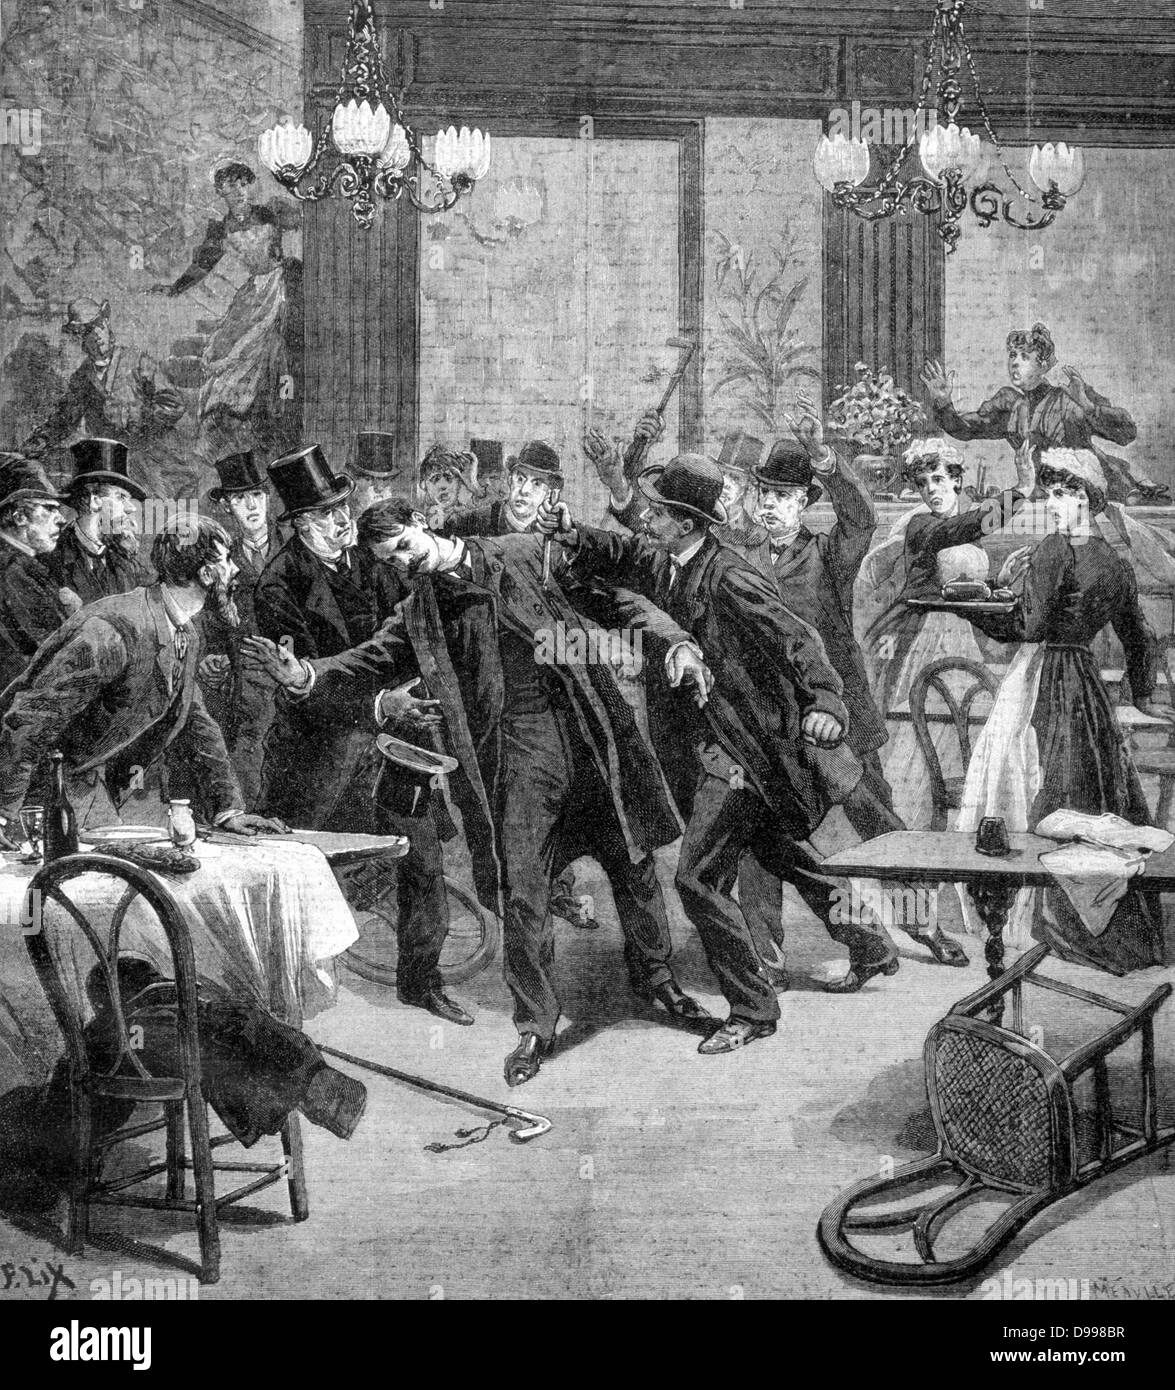 Knife attack on Georgevich, Serbian plenipotentiary in France ,in the Restaurant Duval, rue de l'Opera, Paris. From 'Le Petit Journal', Paris, 2 December 1893.  South-eastern Europe, Balkans Stock Photo